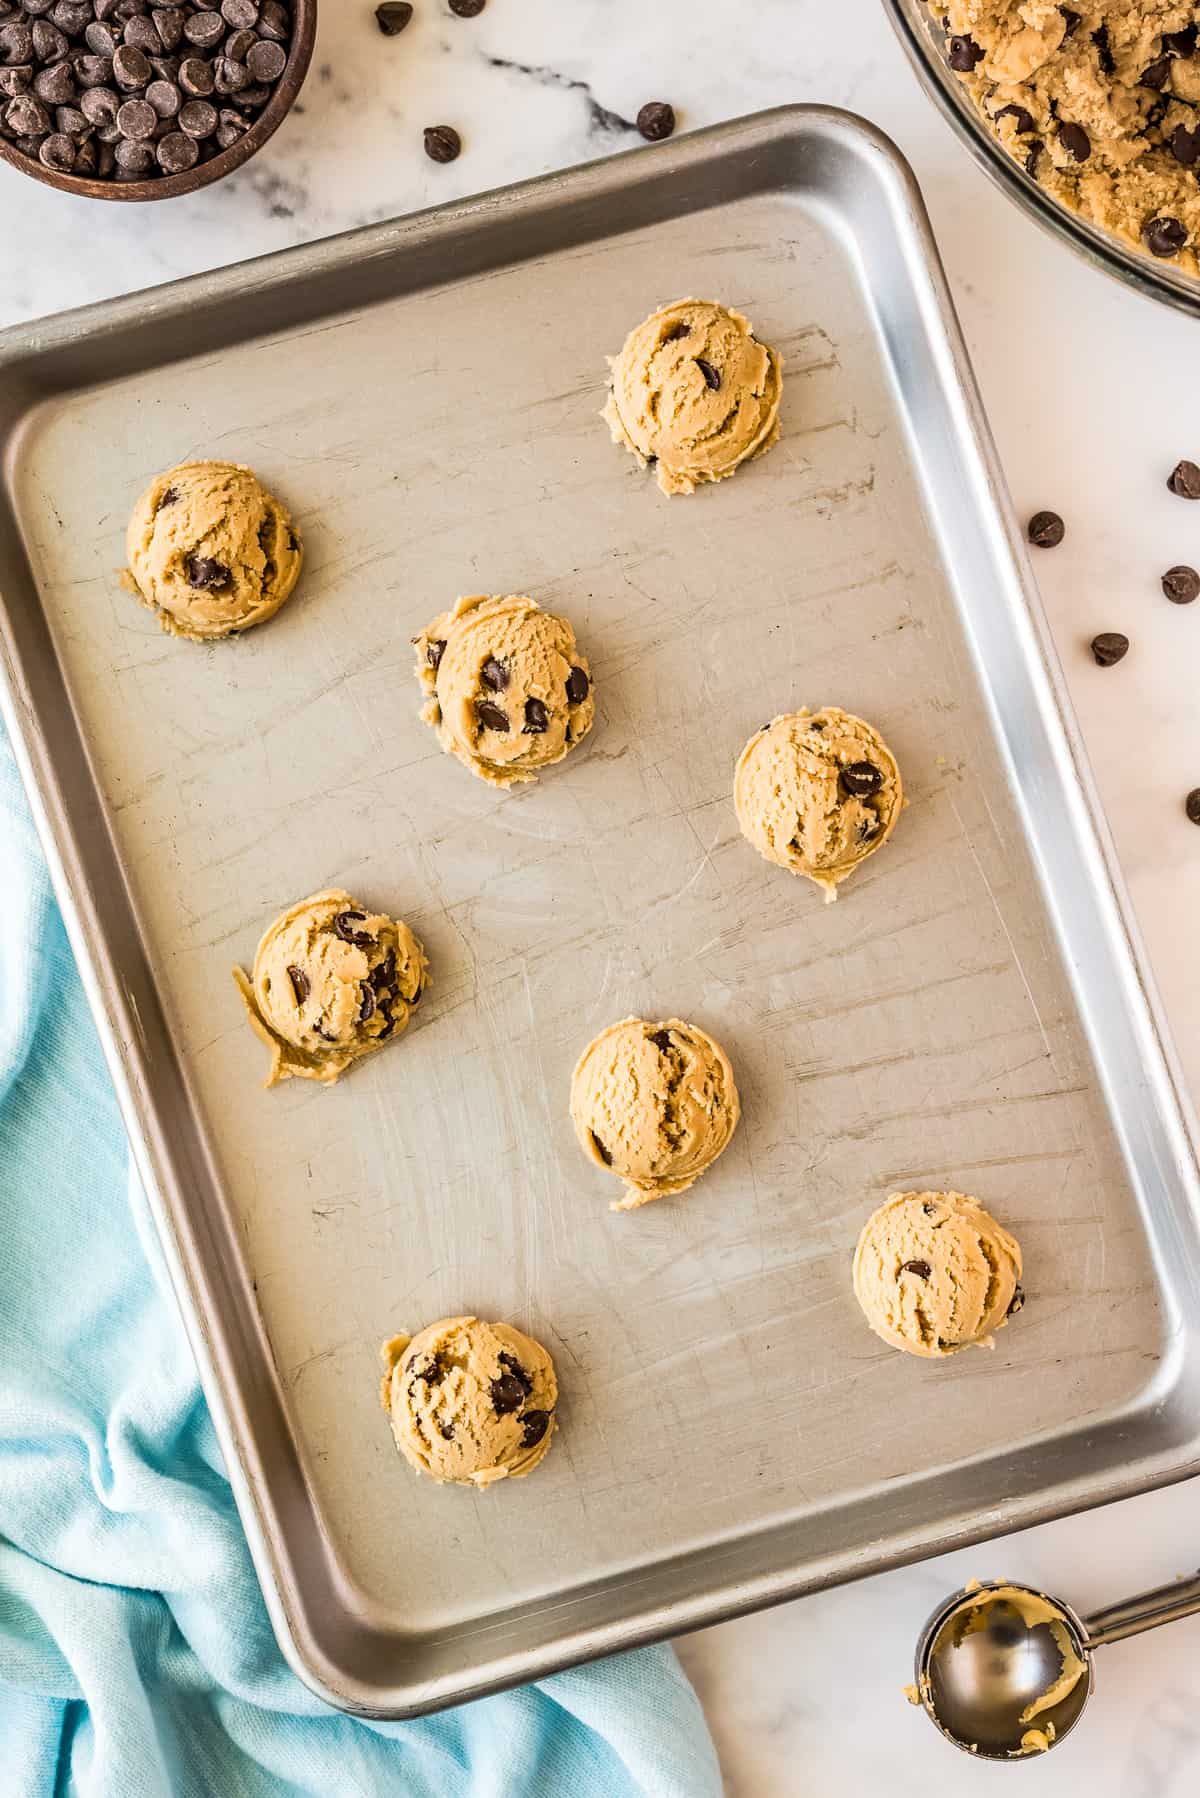 Chocolate Chip Cookie Dough scoops on baking sheet